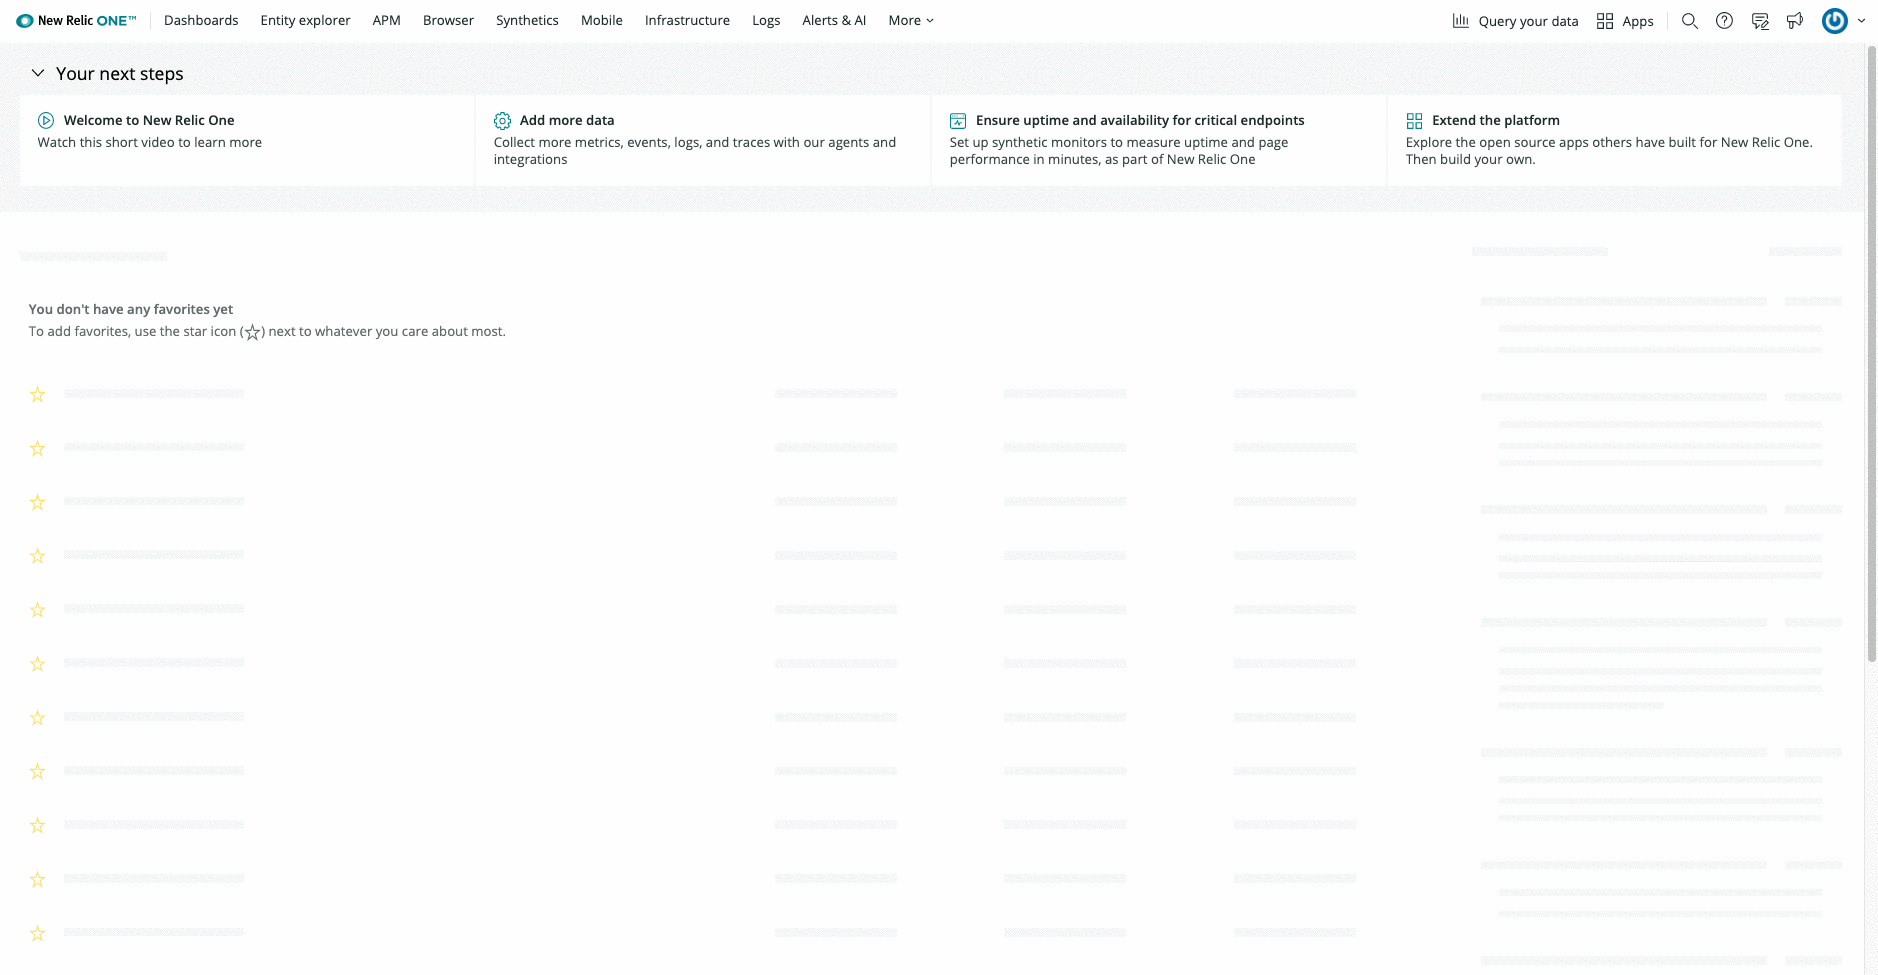 New Relic - What's new feature